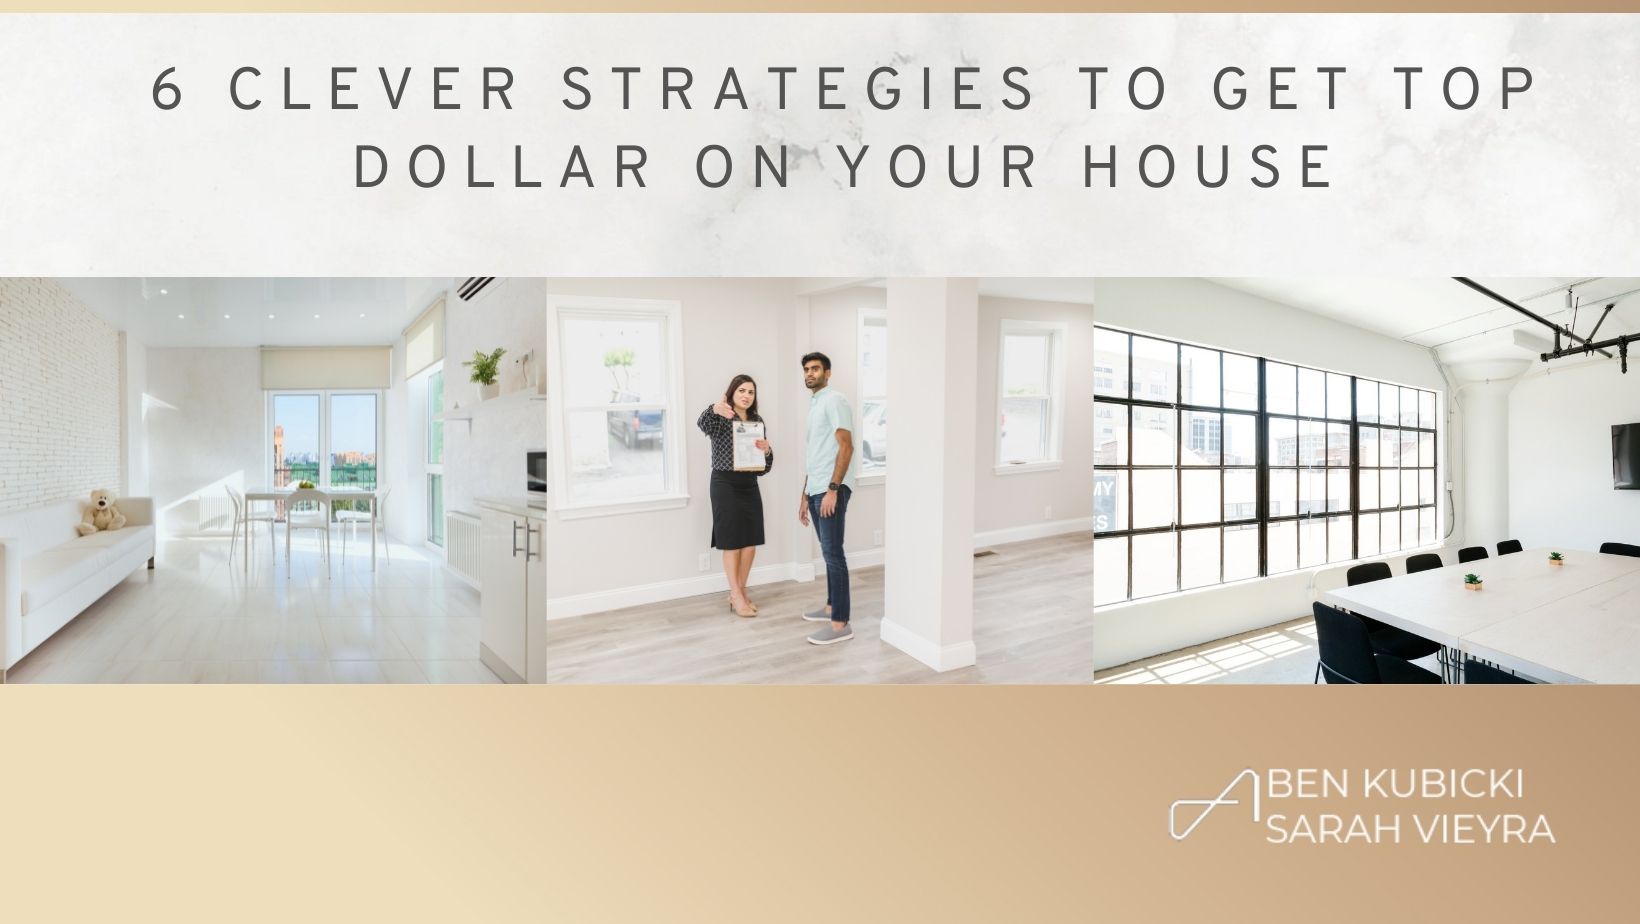 6 Clever Strategies to Get Top Dollar on Your House